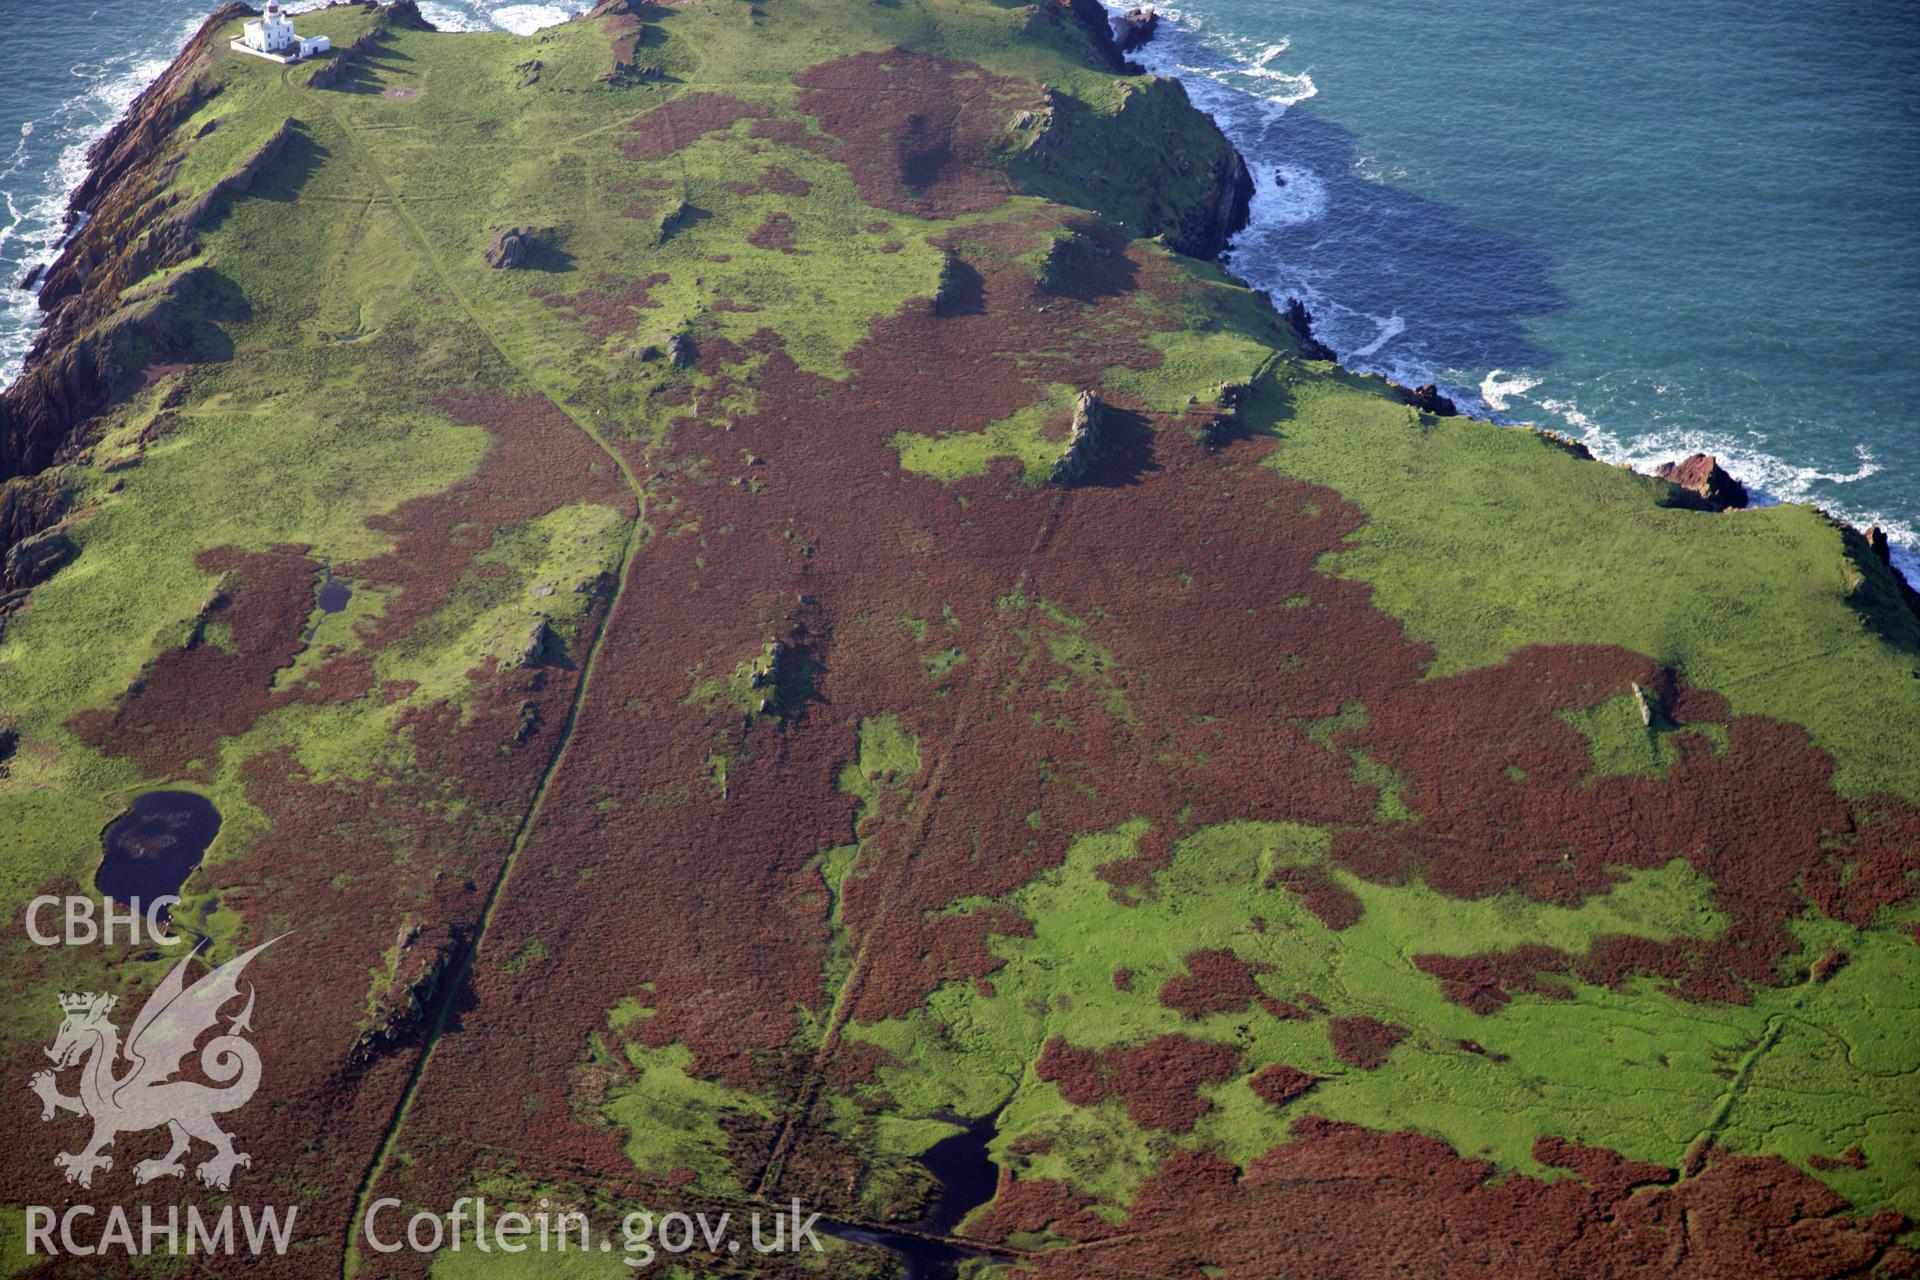 RCAHMW colour oblique photograph of Winter Pond and field boundaries, Skokholm Island, viewed from the south-east. Taken by O. Davies & T. Driver on 22/11/2013.